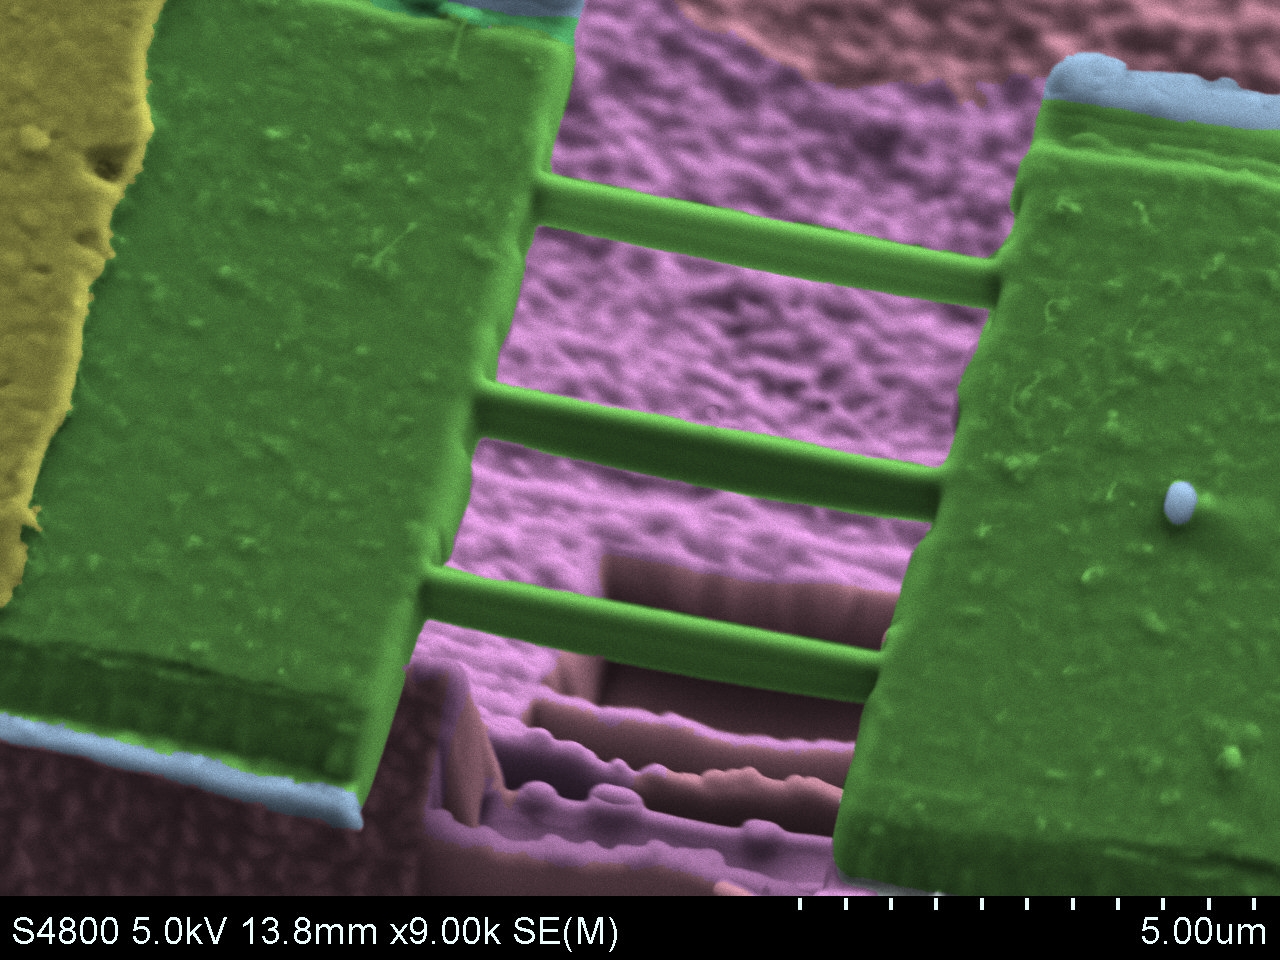 Scanning Electron Microscope: a silicon carbide nanowire array fabricated using focused ion beam.